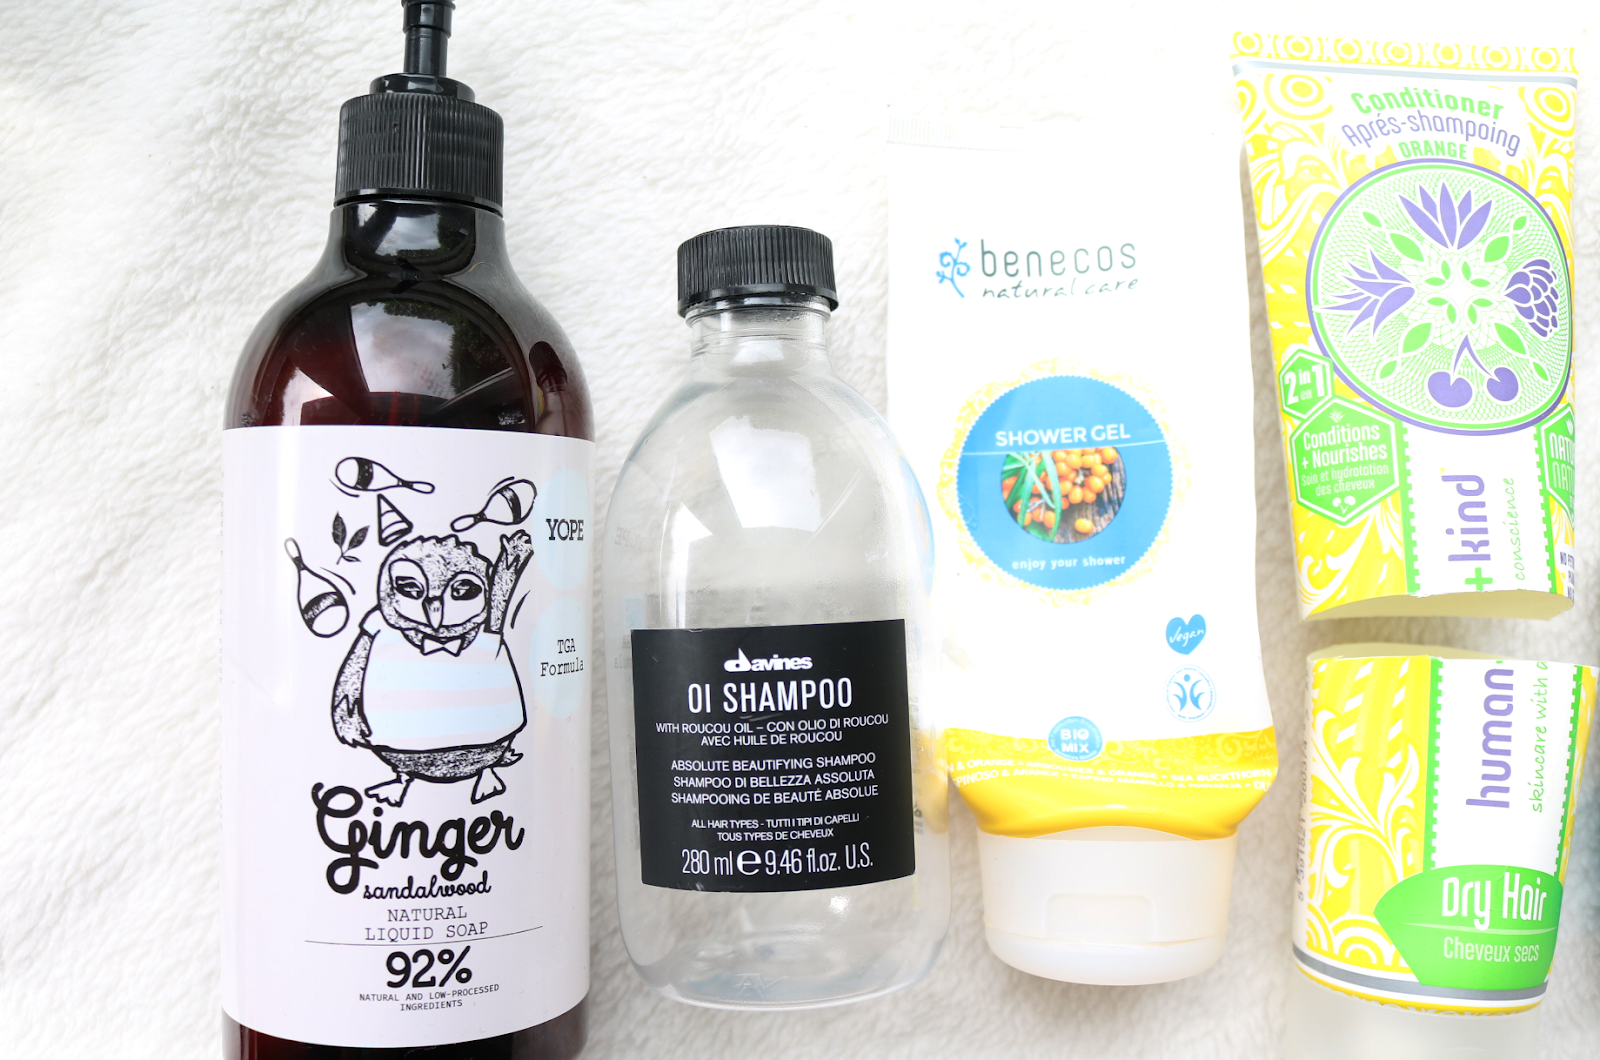 April Empties: Products I've Used Up